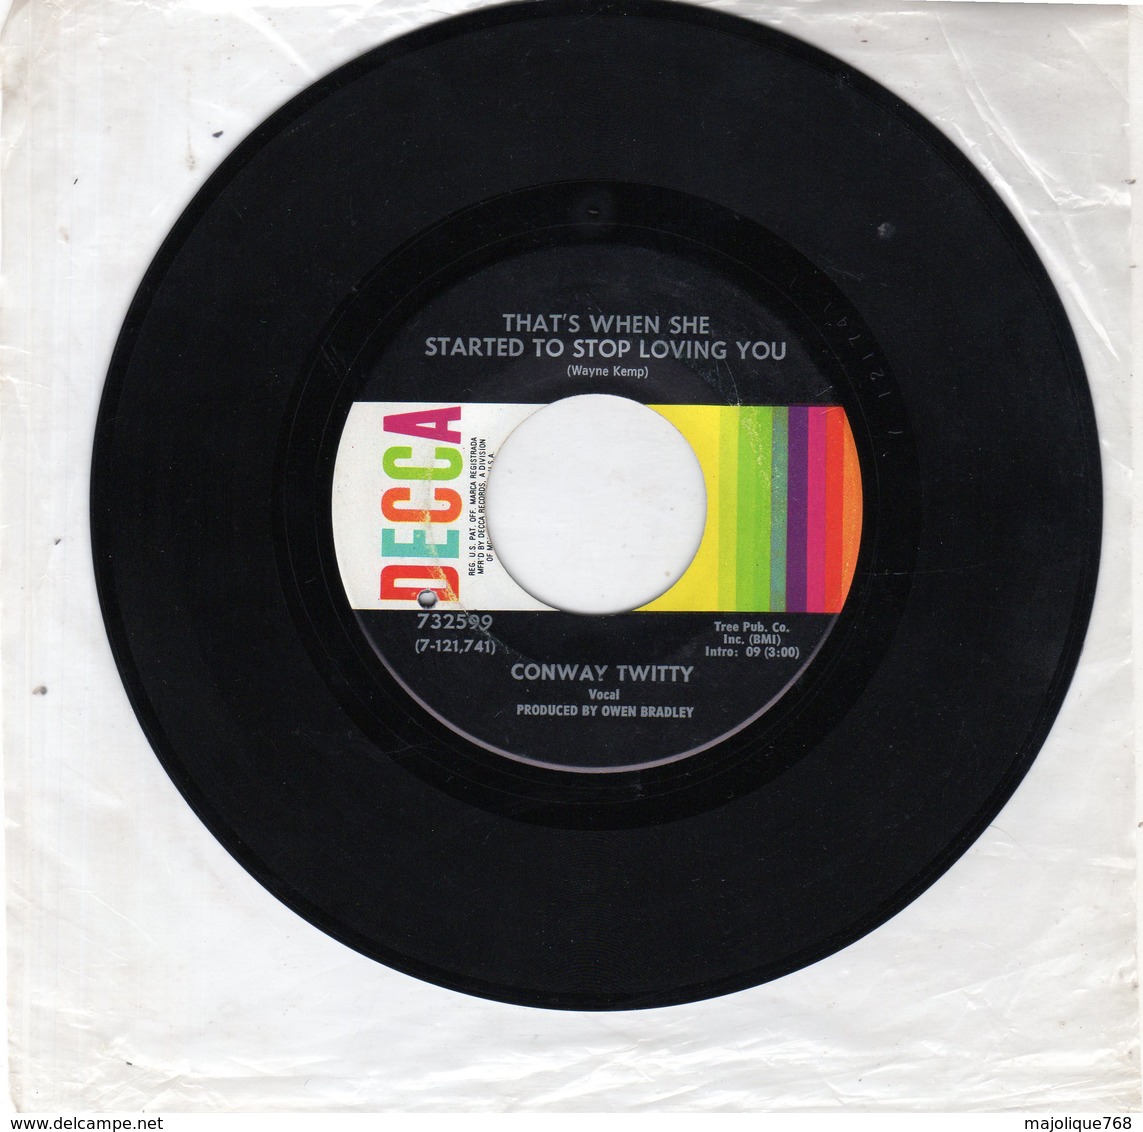 Conway Twitty - That'S When She Started To Stop Loving You - I'LL Get Over Losing You - DECCA 732599 - 1969 US - Country & Folk